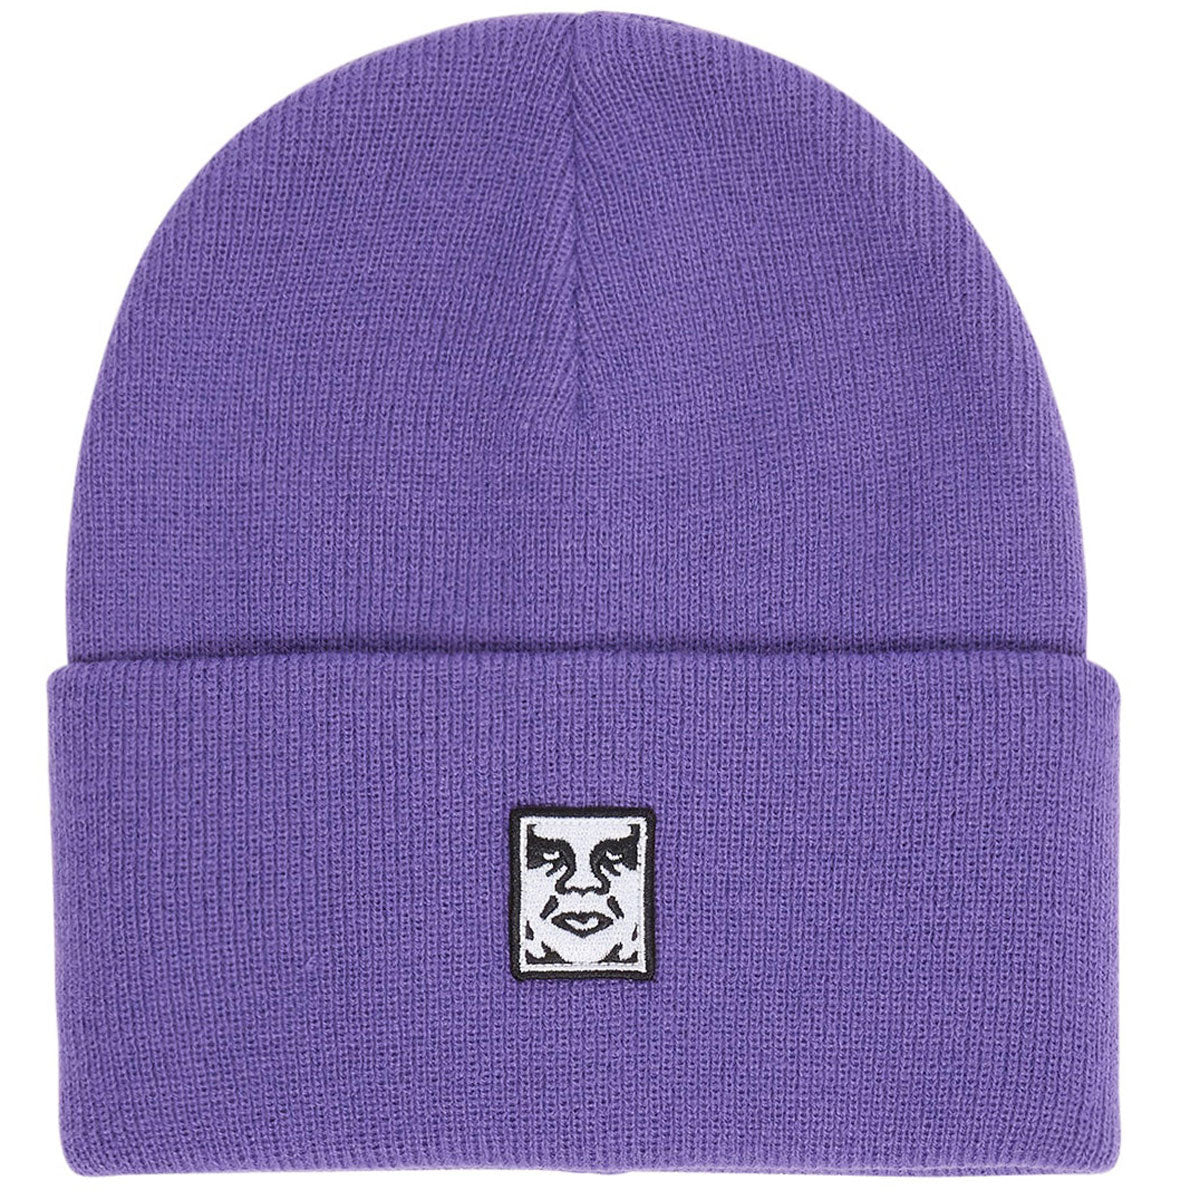 Obey Icon Patch Cuff Beanie - Passion Flower image 1